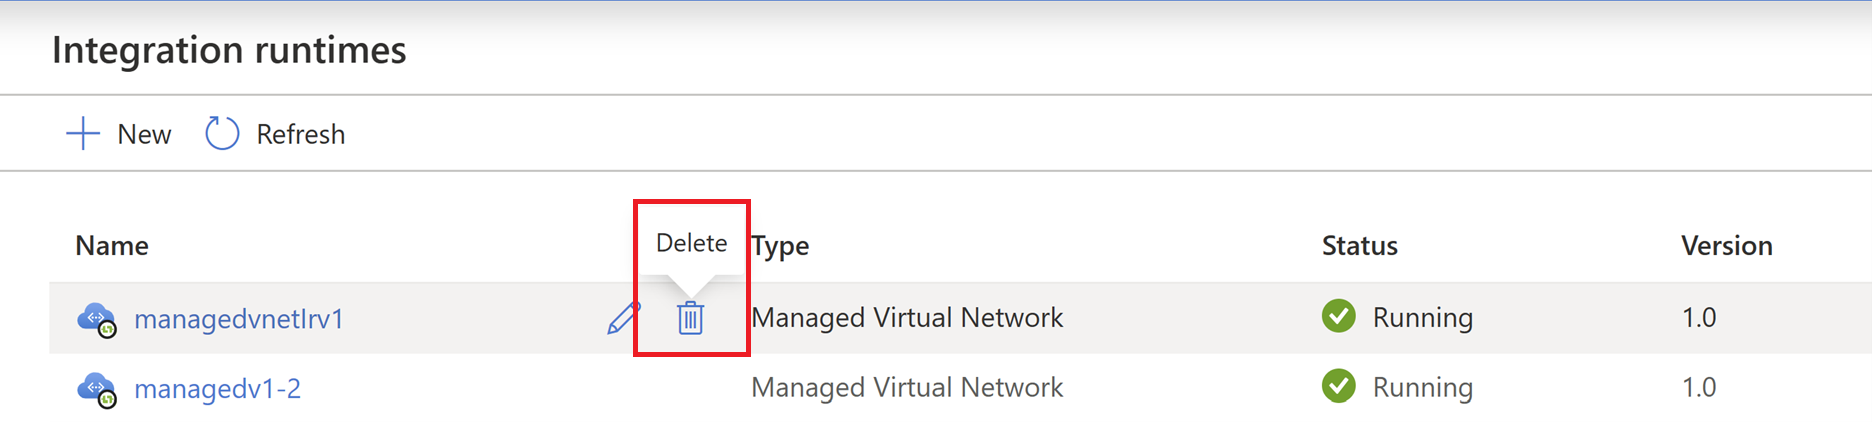 Screenshot of the integration runtime page, showing a managed virtual network highlighted with the delete button.